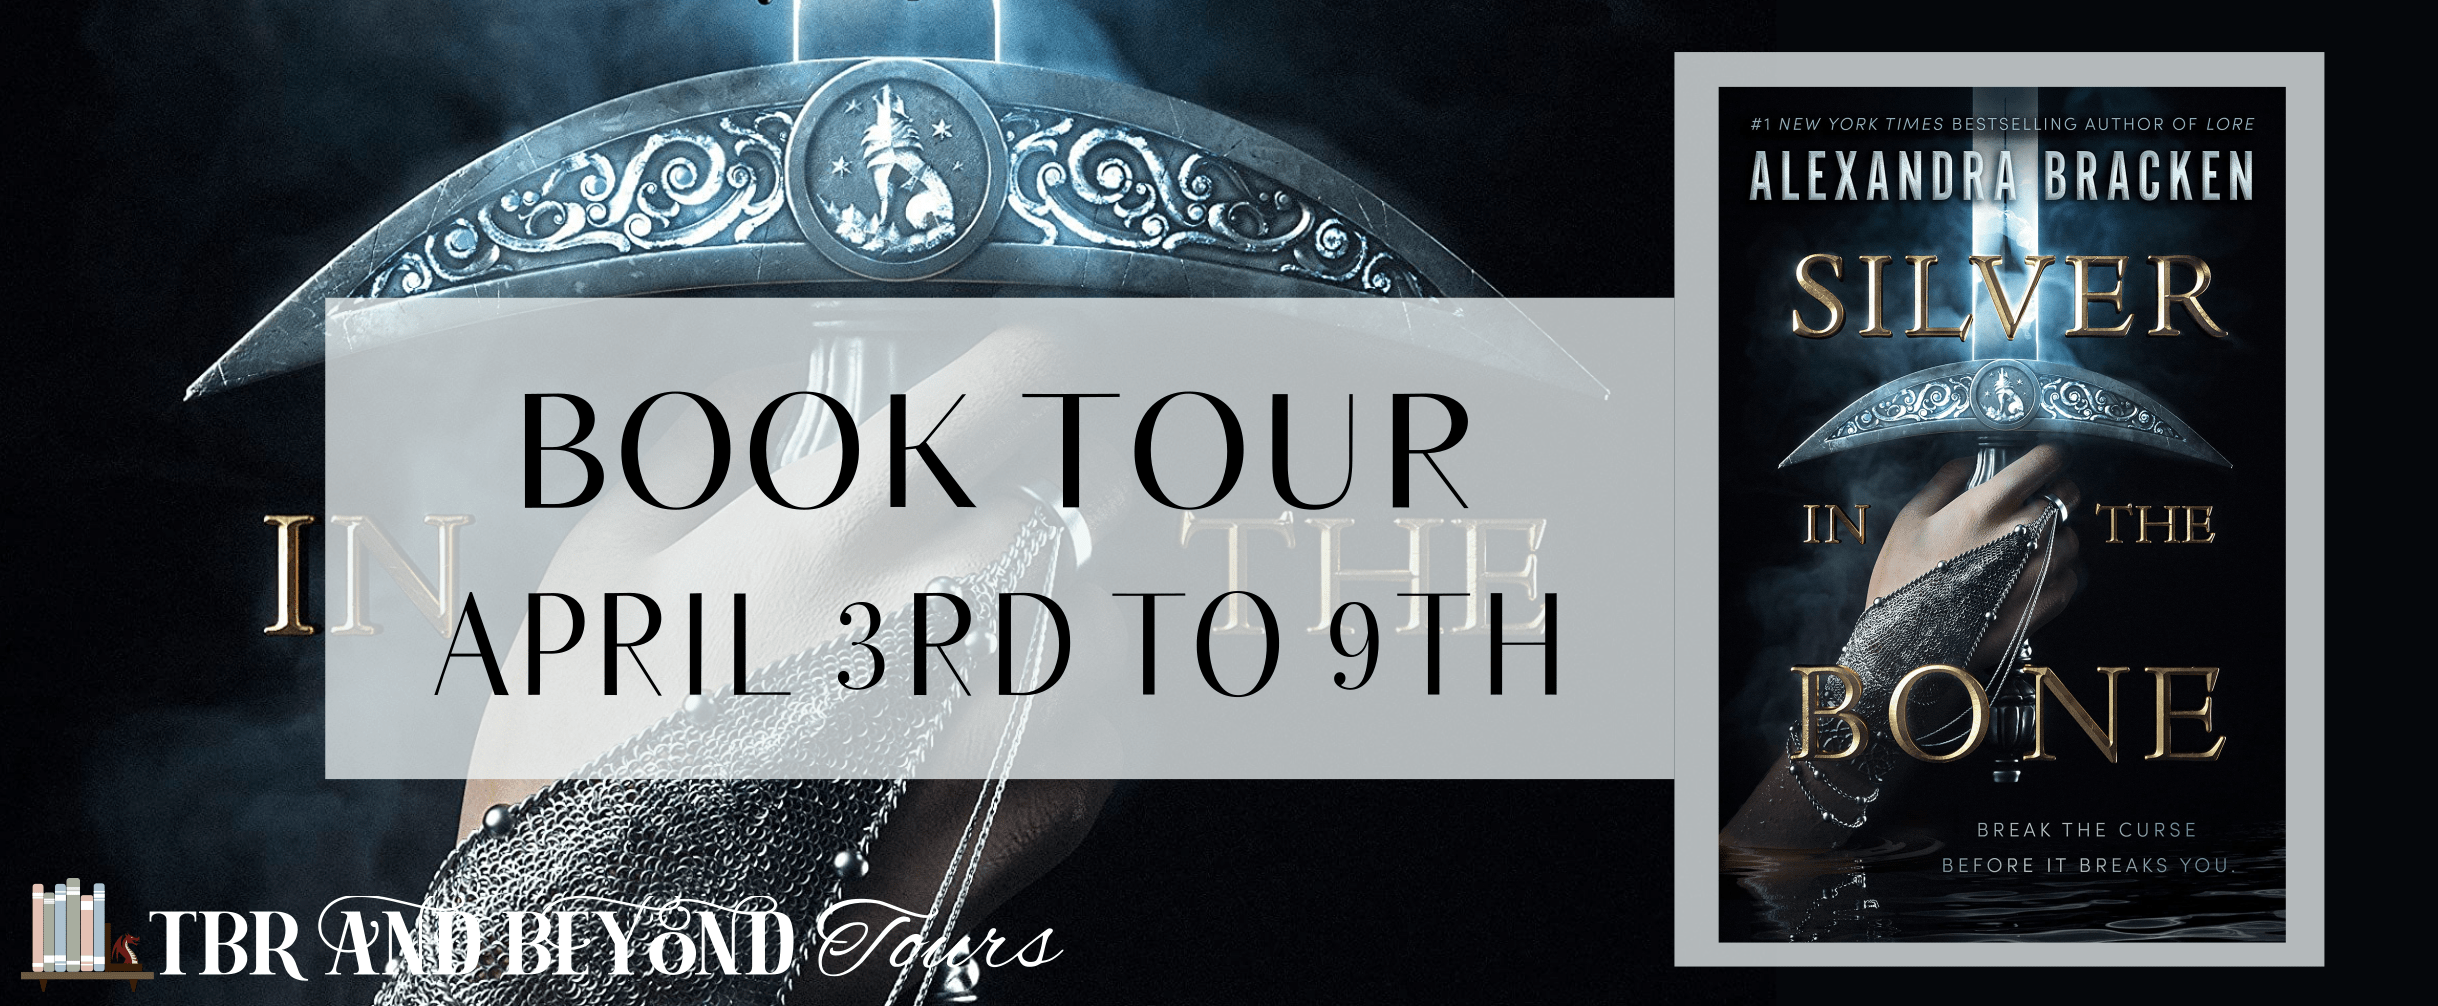 Silver in the Bone by Alexandra Bracken TBR & Beyond Blog Tour ● Review and Favorite Quotes